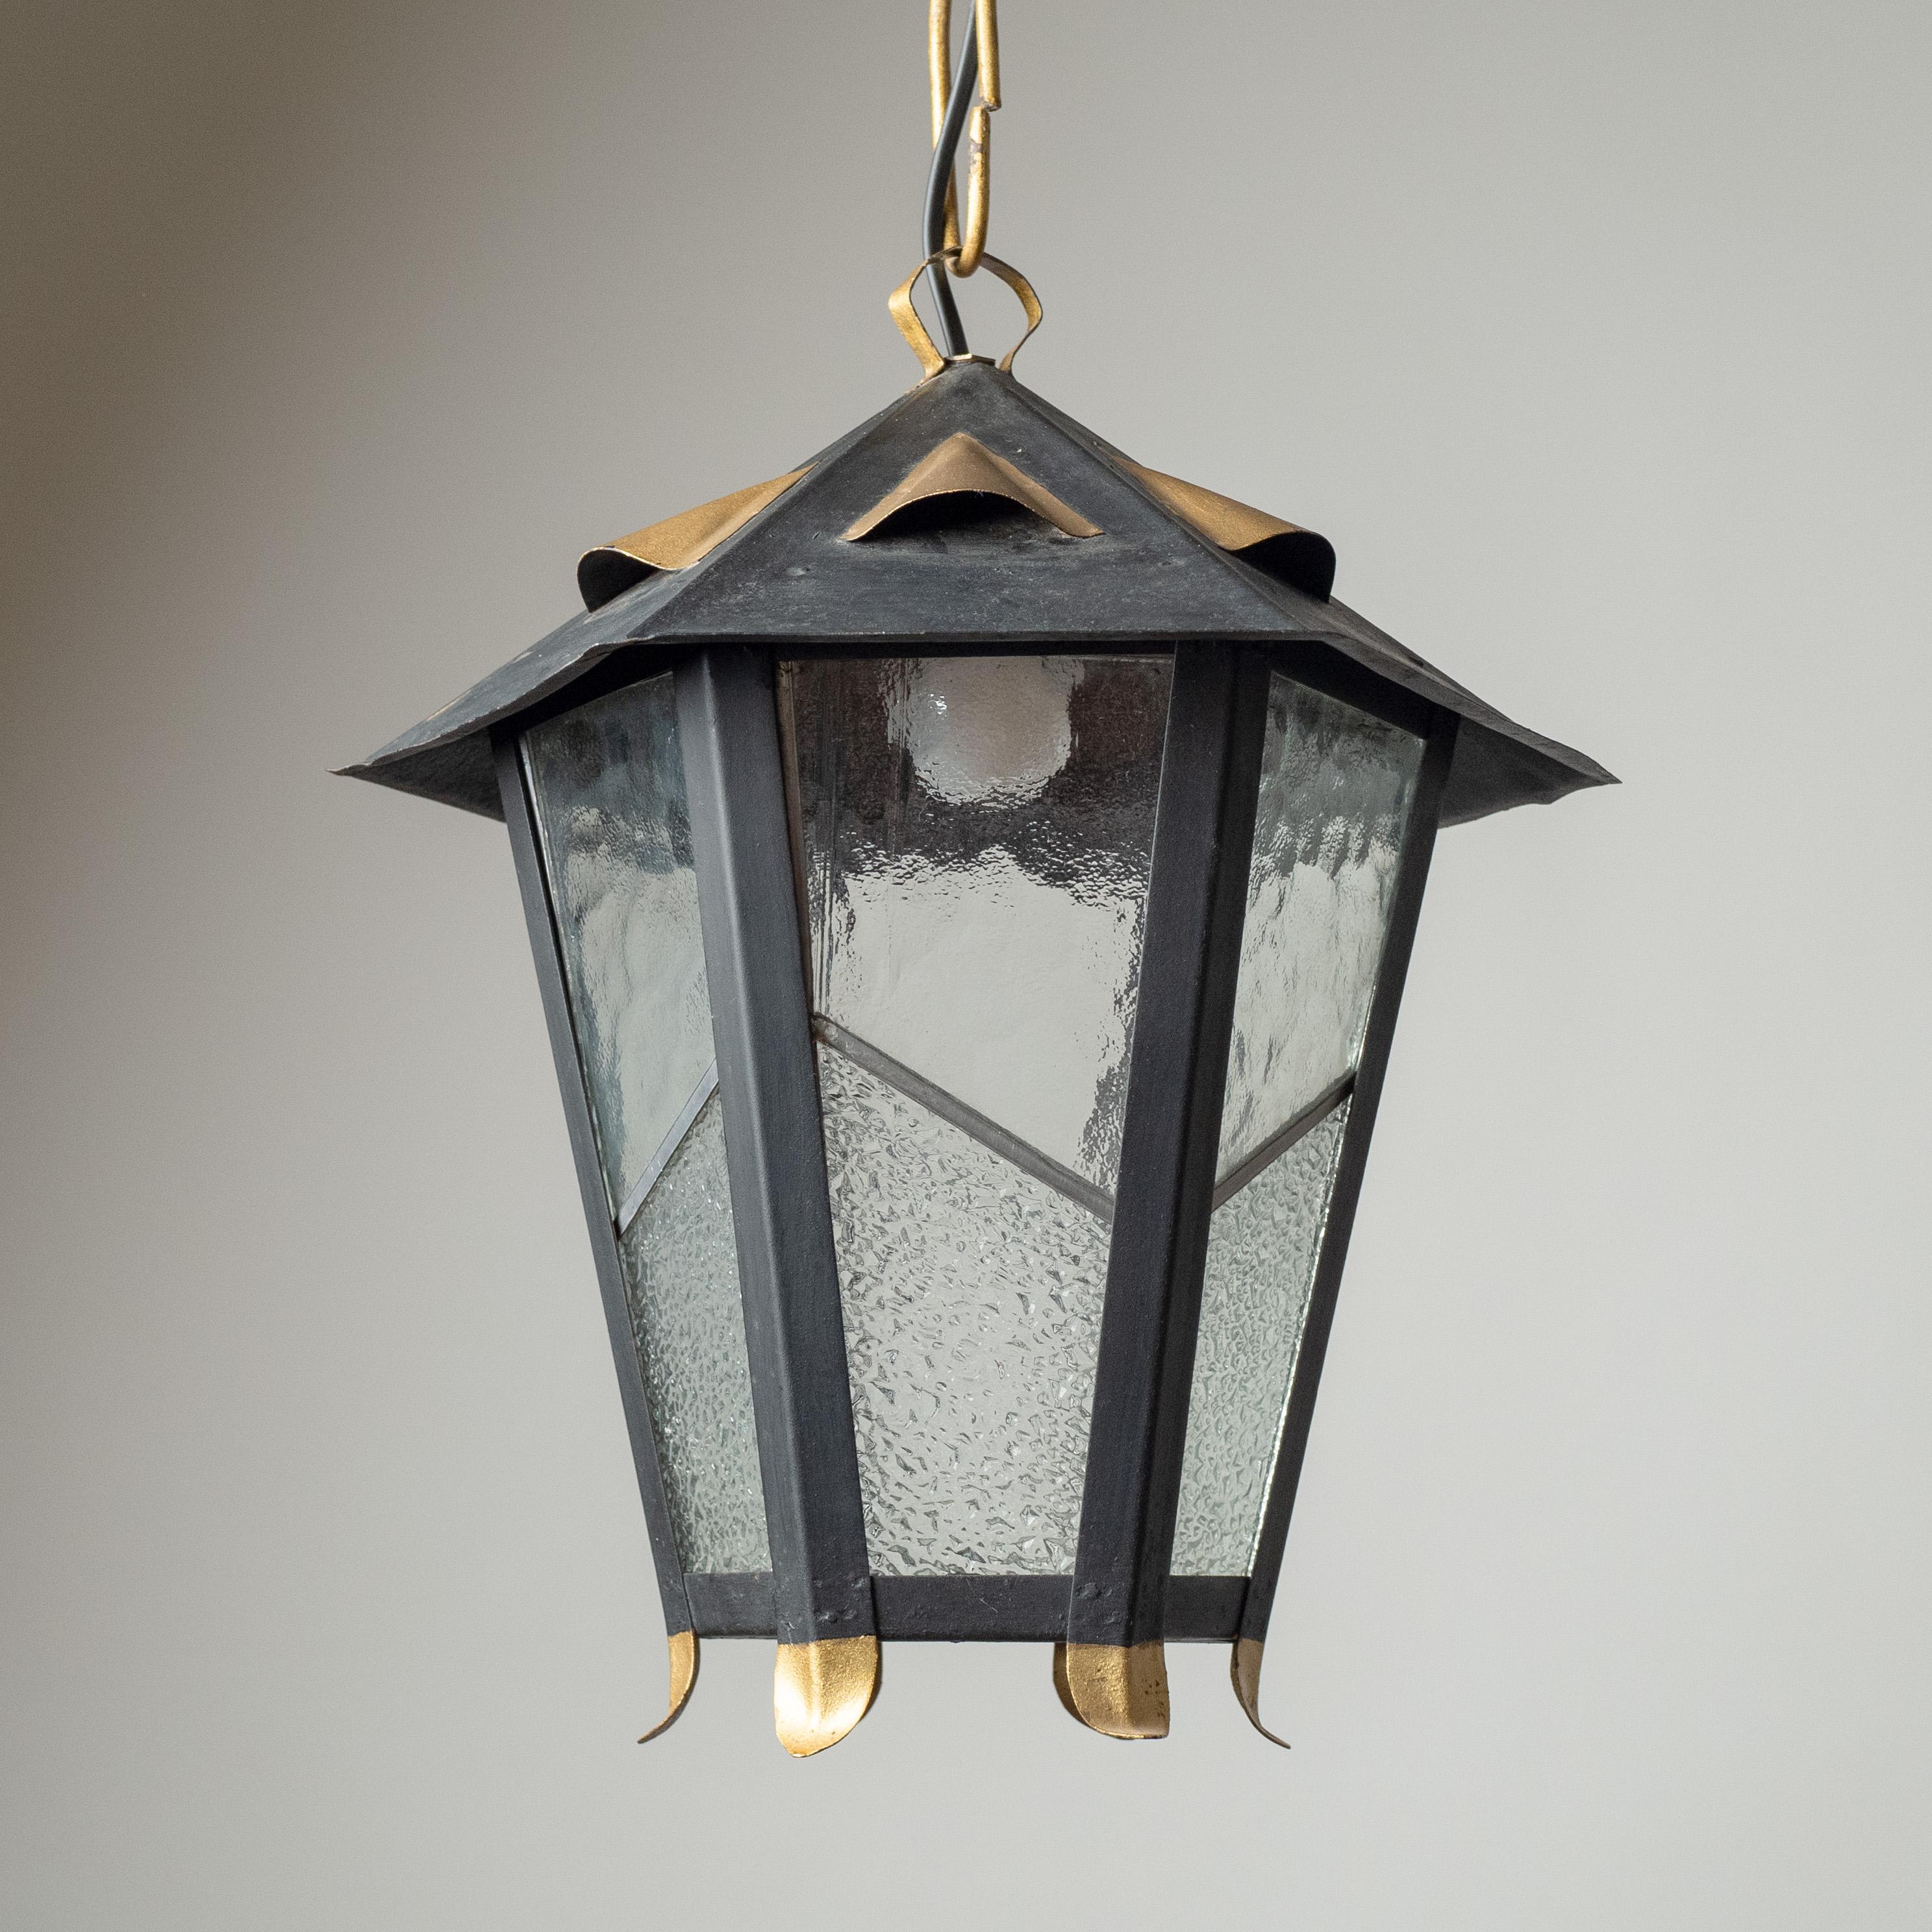 Lacquered French Lantern, 1960s, Steel and Textured Glass